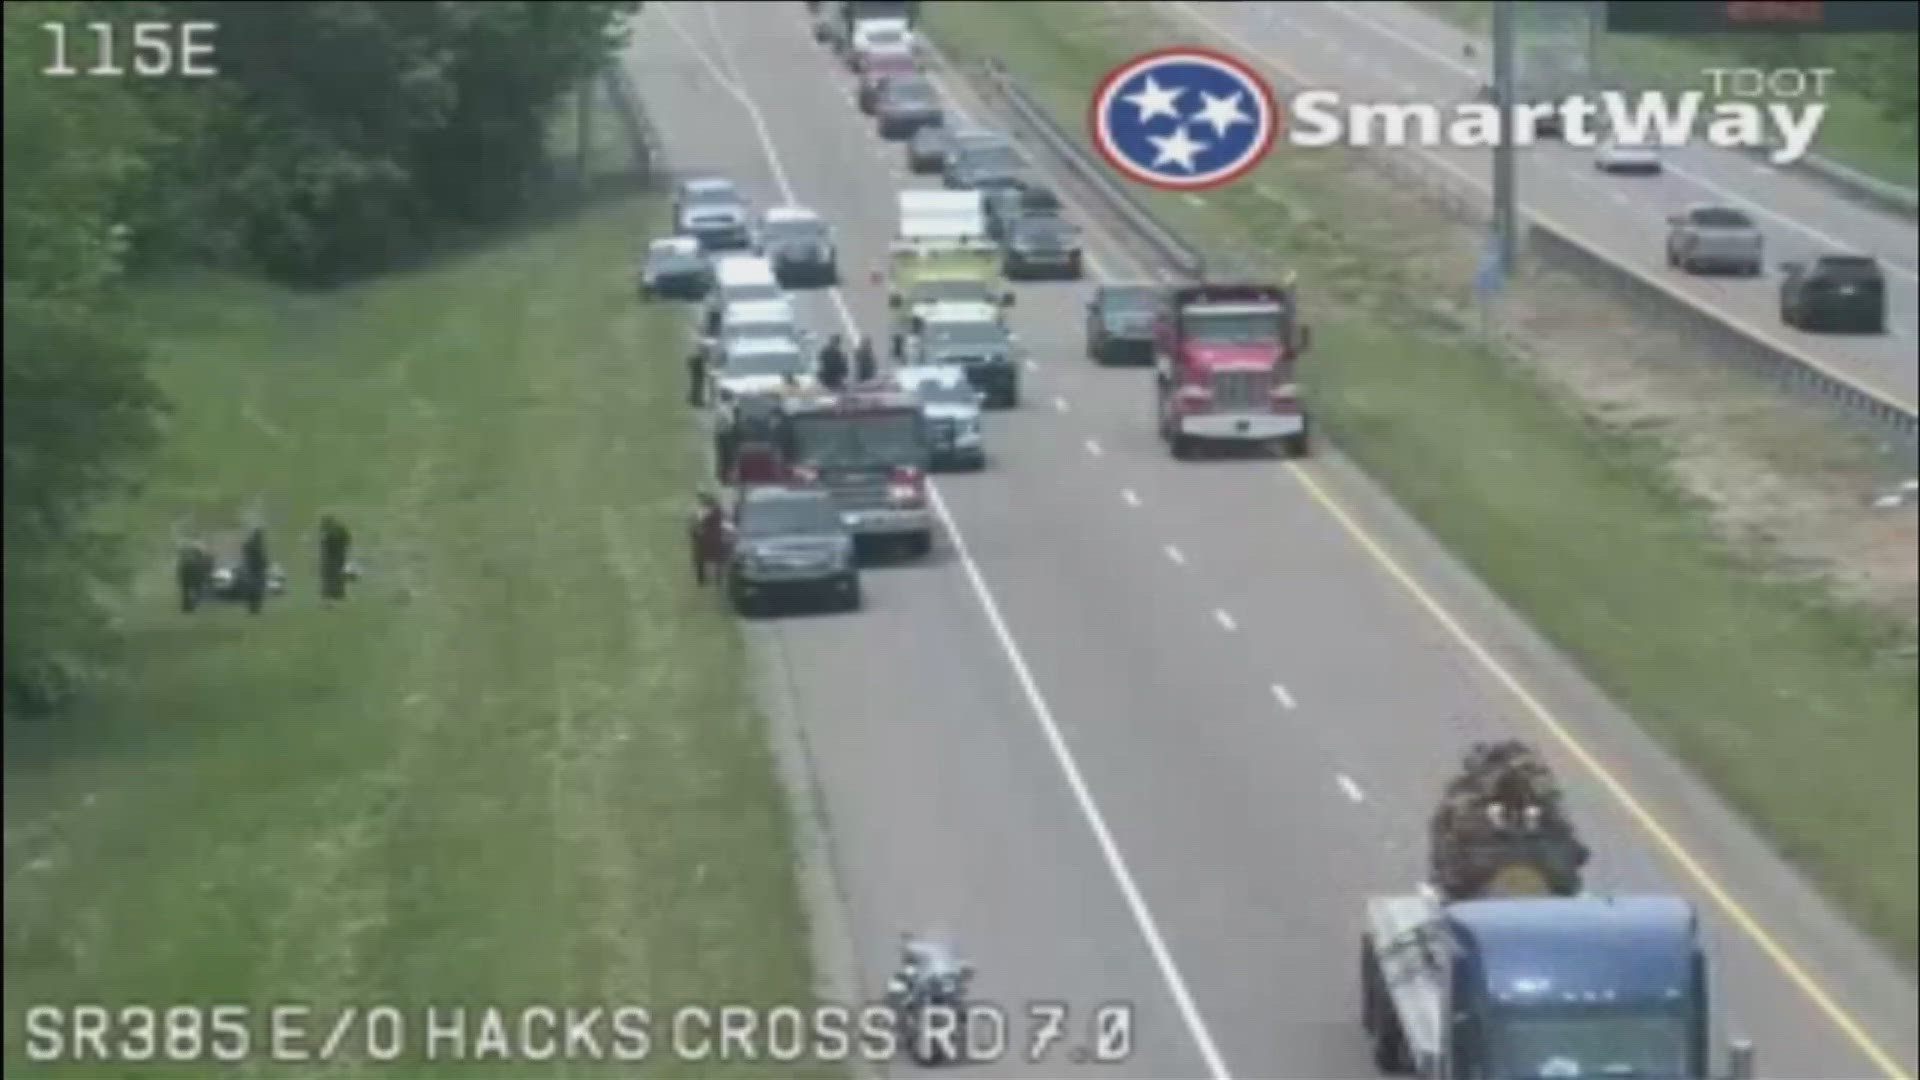 The Shelby County Sheriff’s Office said the crash happened about 12:30 p.m. Thursday along 385 east of Hacks Cross Rd.